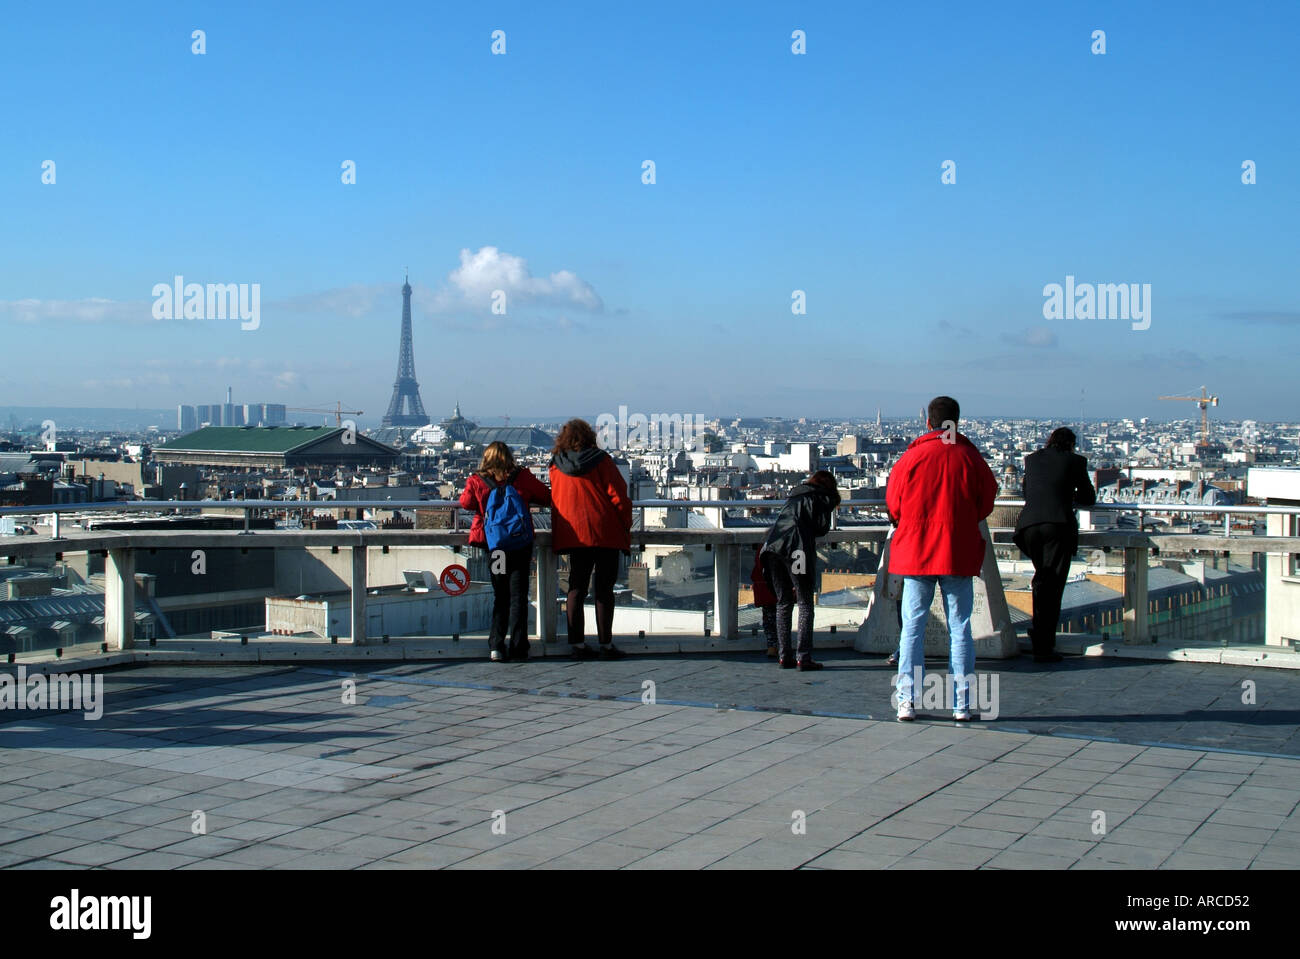 Paris skyline view from Galeries Lafayette store rooftop exterior public viewing area Eiffel Tower distant on cold winter sunny blue sky day in France Stock Photo